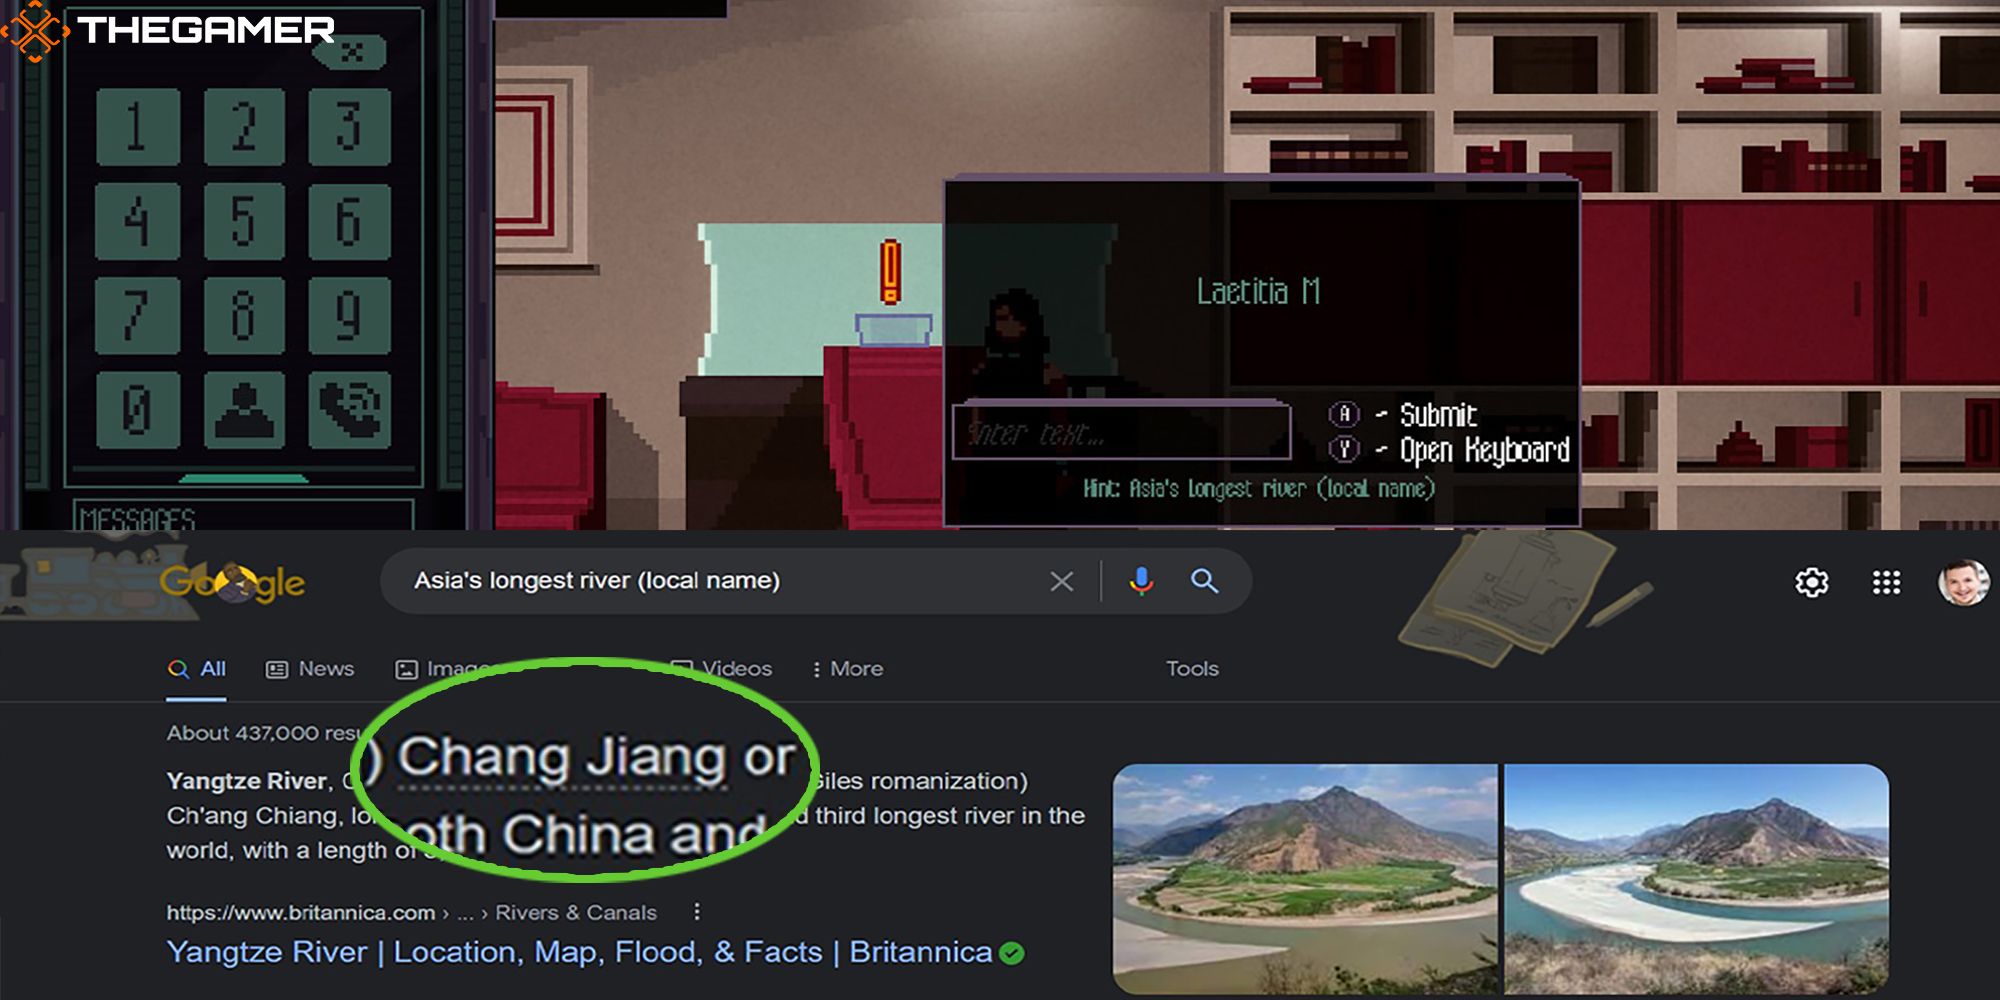 Amira attempts to hack into Laetitia Marlowe's email account in Chinatown Detective Agency. Under the game screenshot is a Google search citing Chang Jiang, the local name for Asia's longest river.